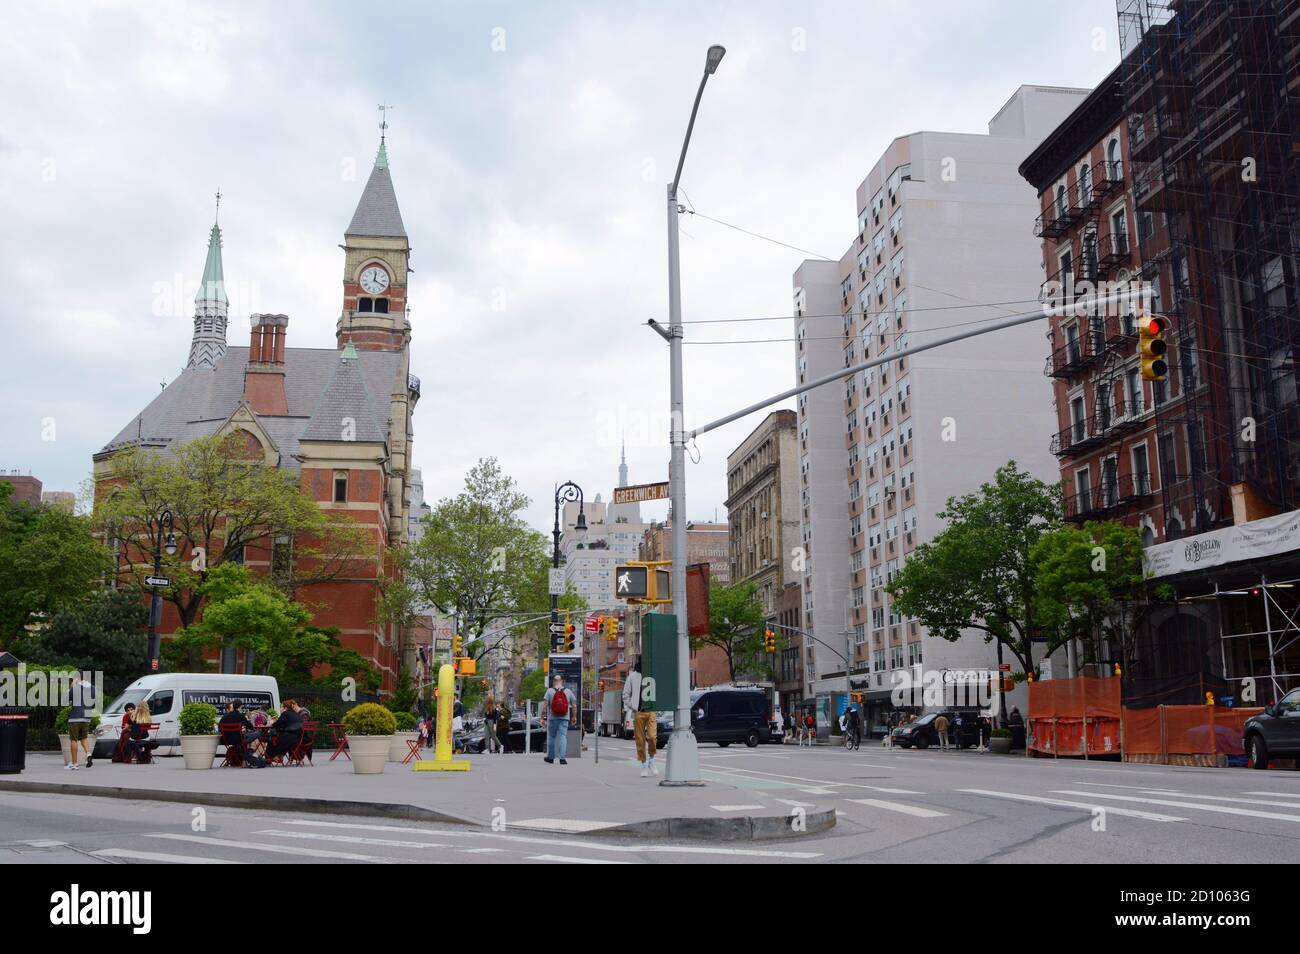 NEW YORK, USA - MAY 10, 2019: Corner of Sixth Avenue and Greenwich Ave with Jefferson Market Library and apartment buildings in New York City on May 1 Stock Photo